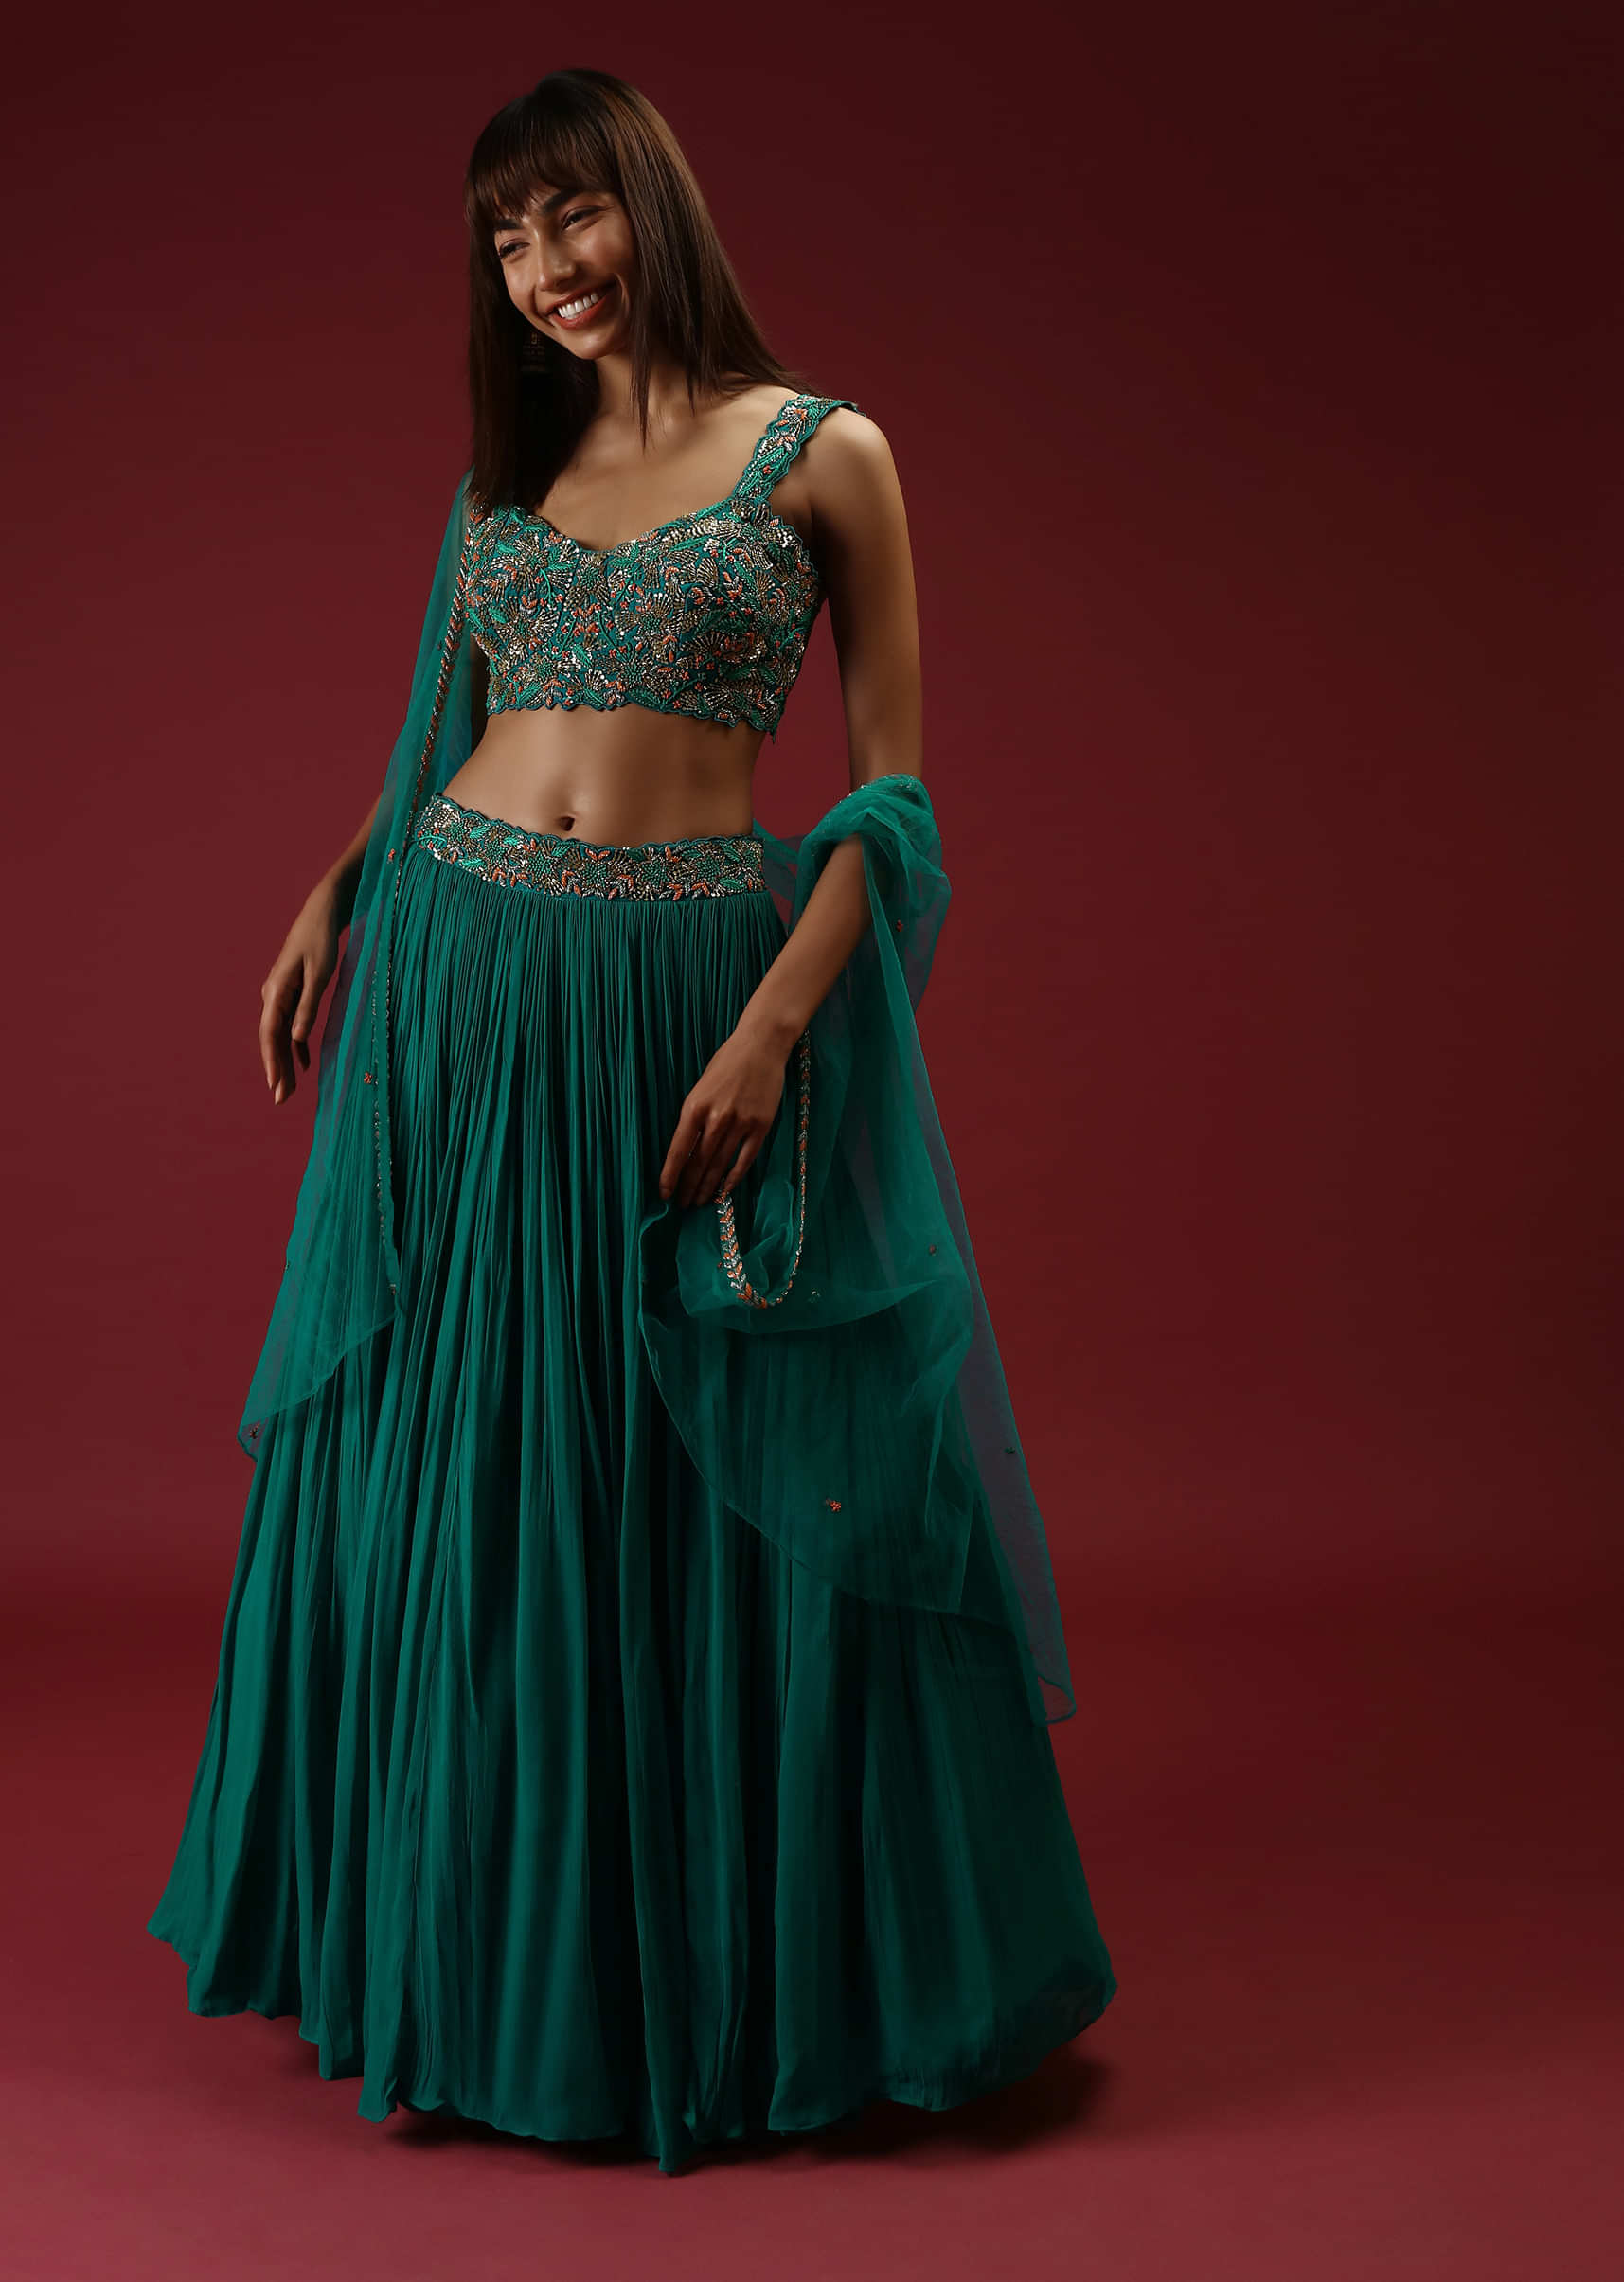 Teal Blue Lehenga Choli With With Multi Colored French Knots And Cut Dana Embroidered Floral Jaal And Matching Cape 